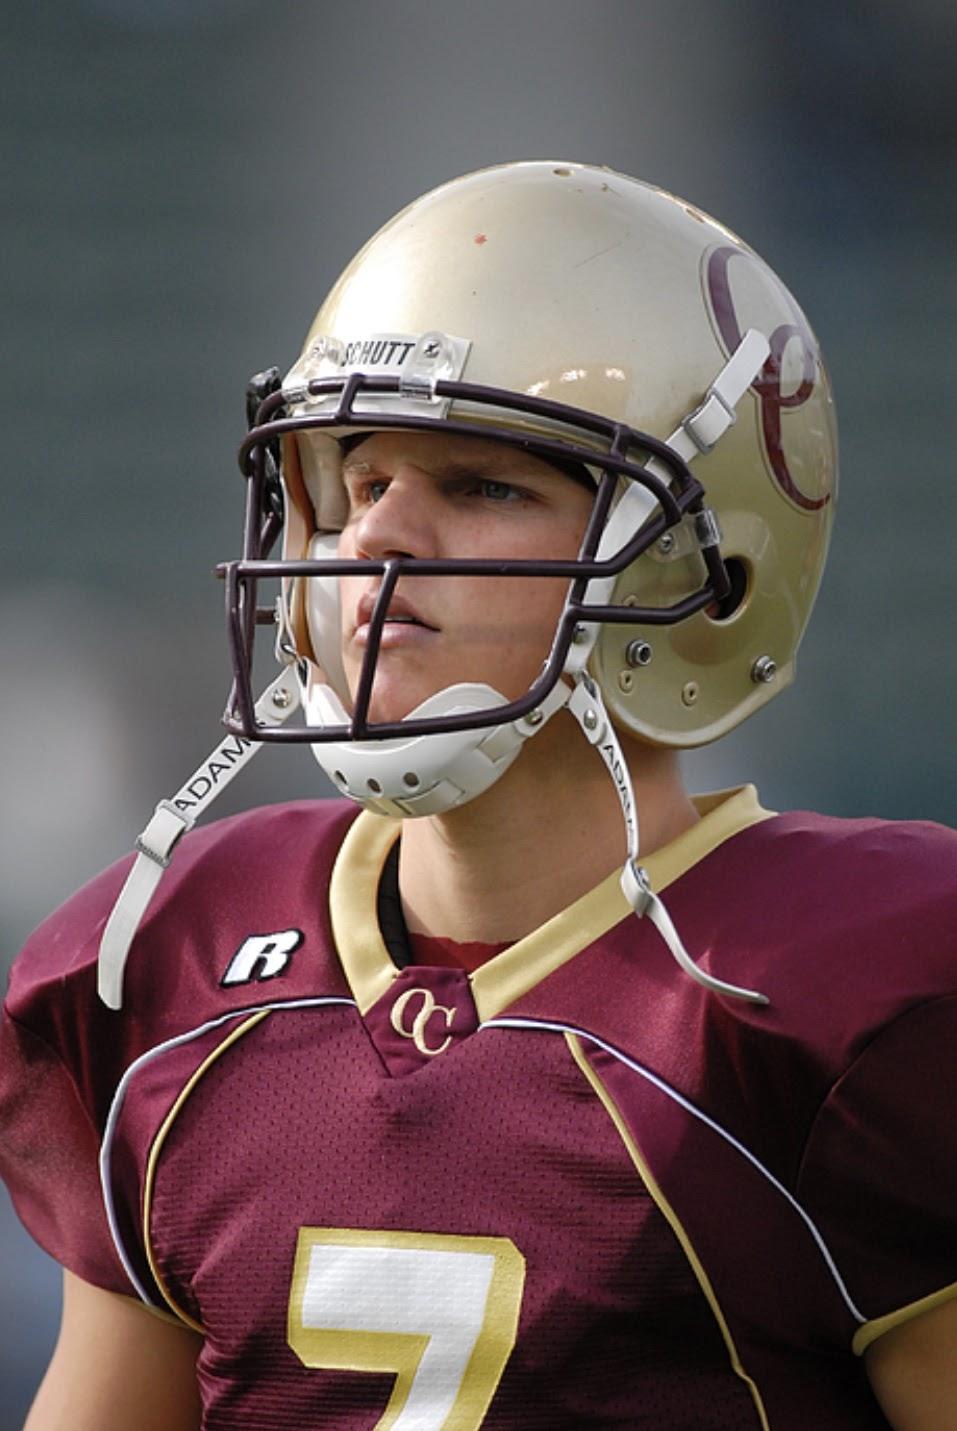 Oaks Christian’s most decorated player — Jimmy Clausen. He went 42–0 as a four-year starter for the Lions, was a U.S. Army All-American and played at Notre Dame. After five forgettable seasons in the NFL, Clausen is widely known as a draft “bust.” Photo courtesy of Icon Sports Wire